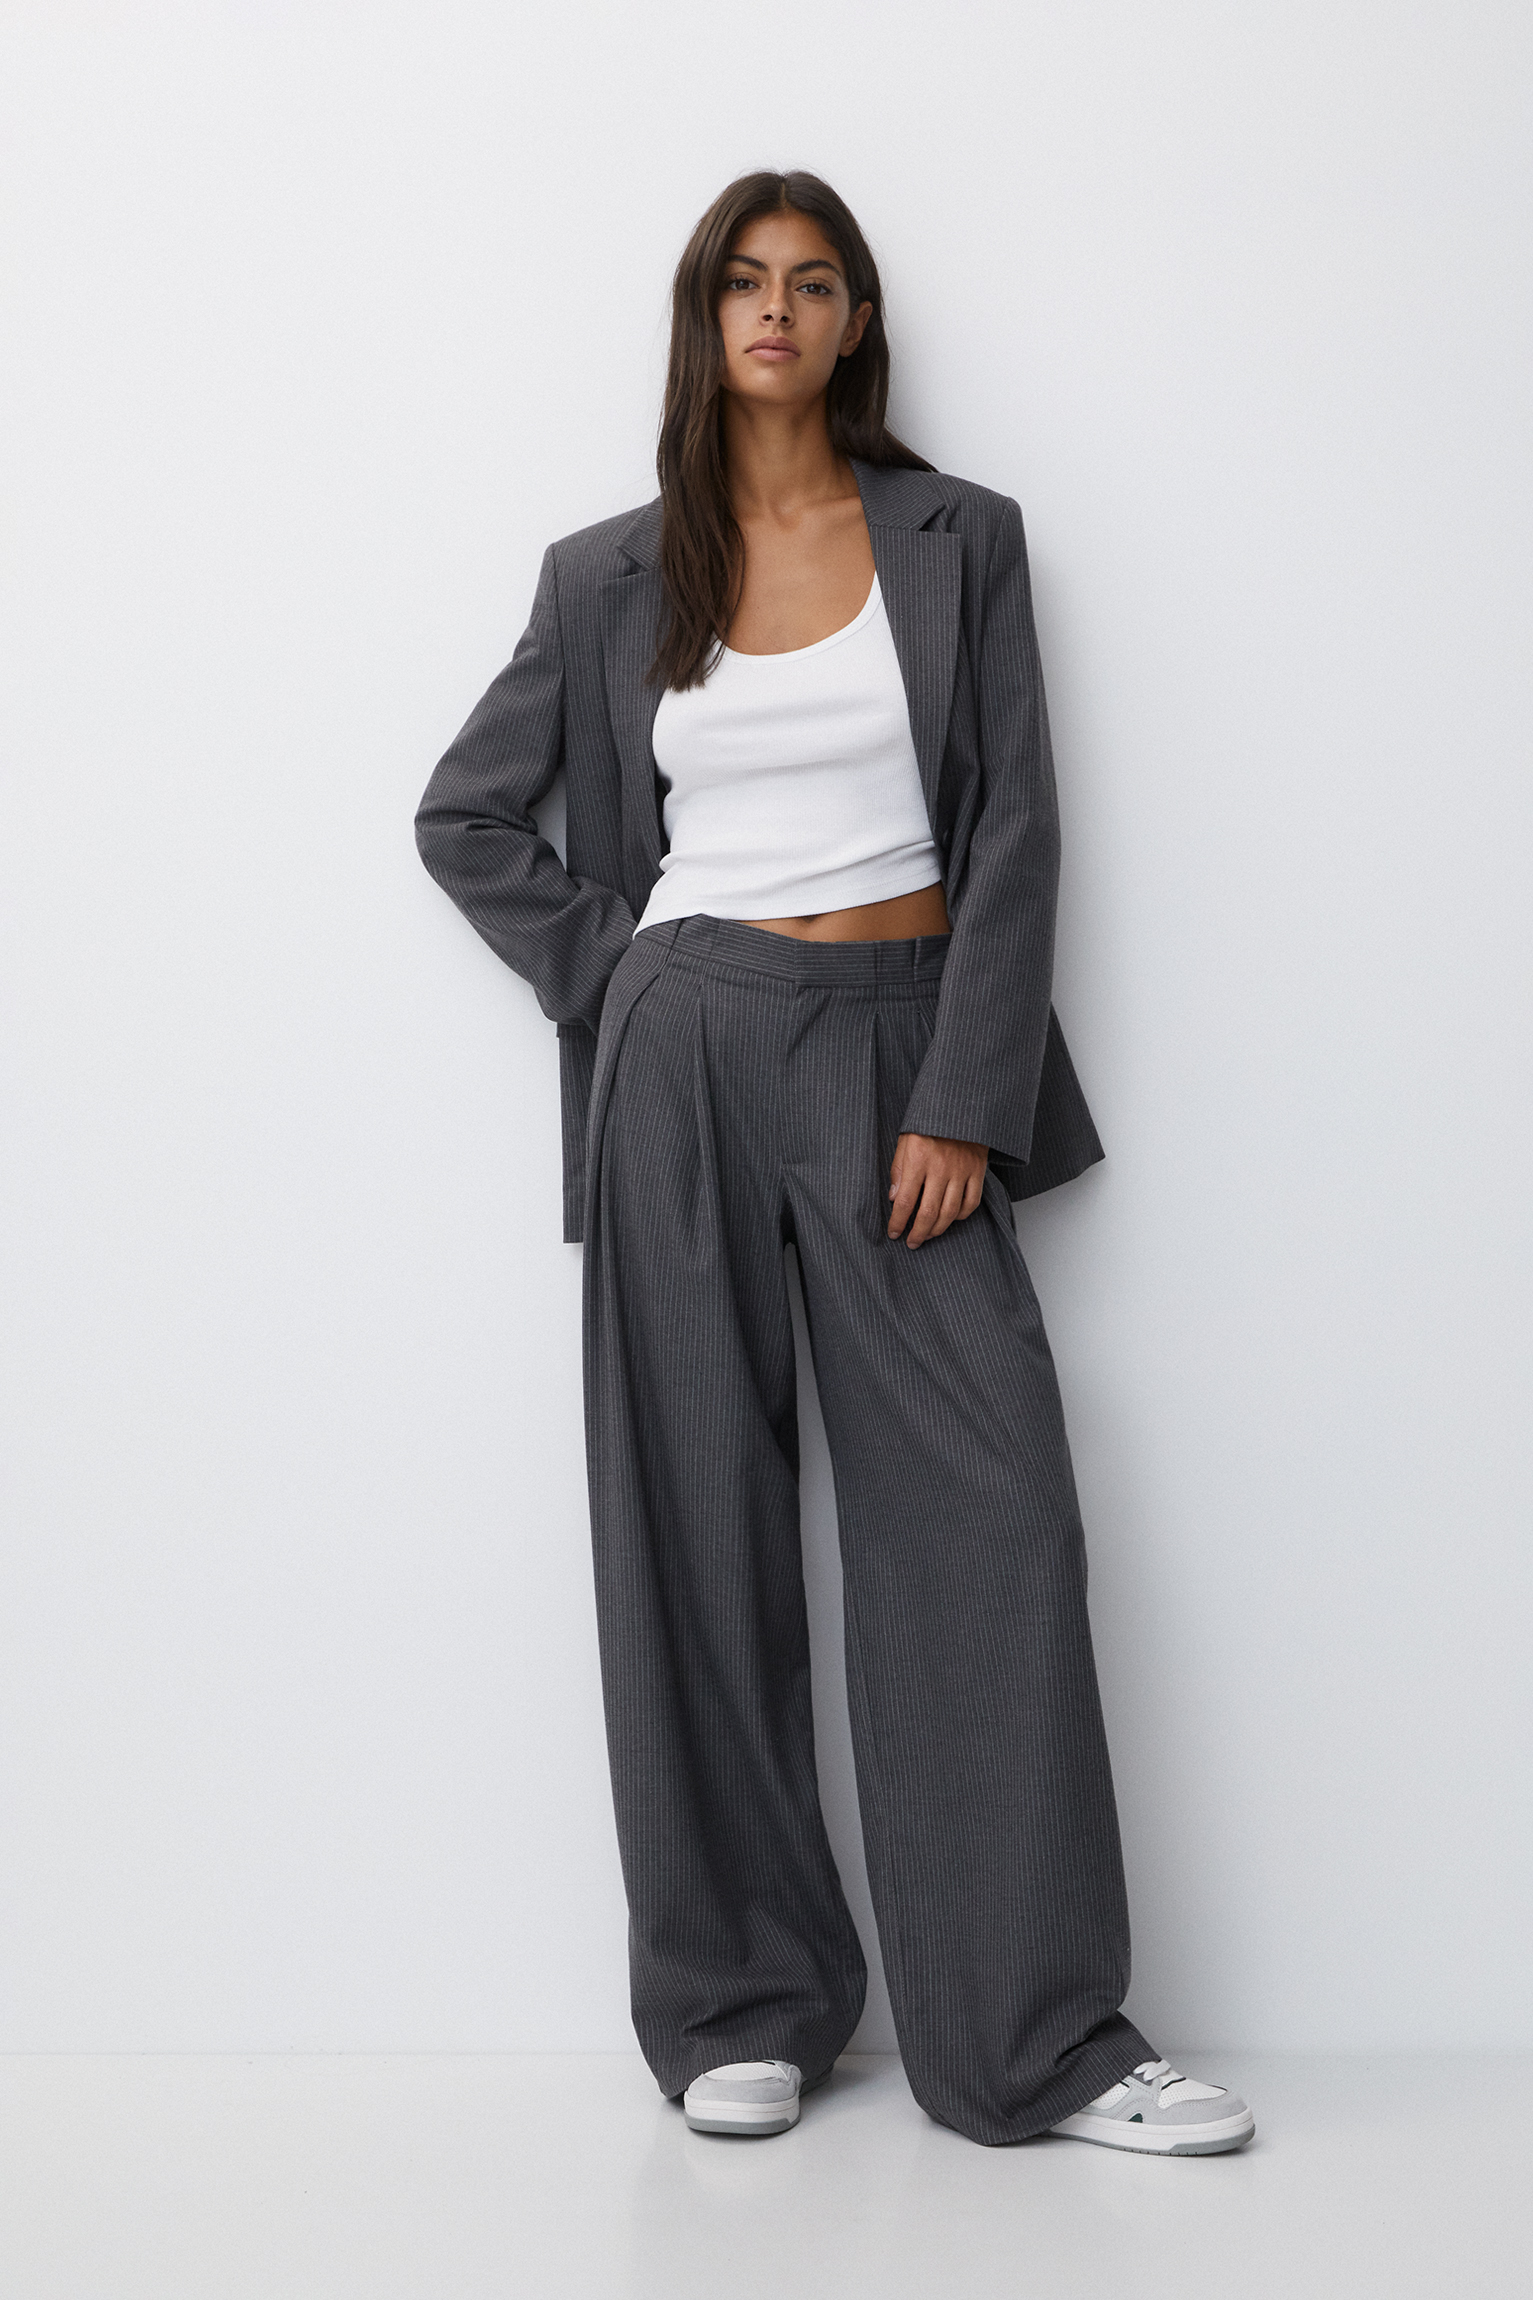 21 Palazzo Trousers To Buy Now | SheerLuxe